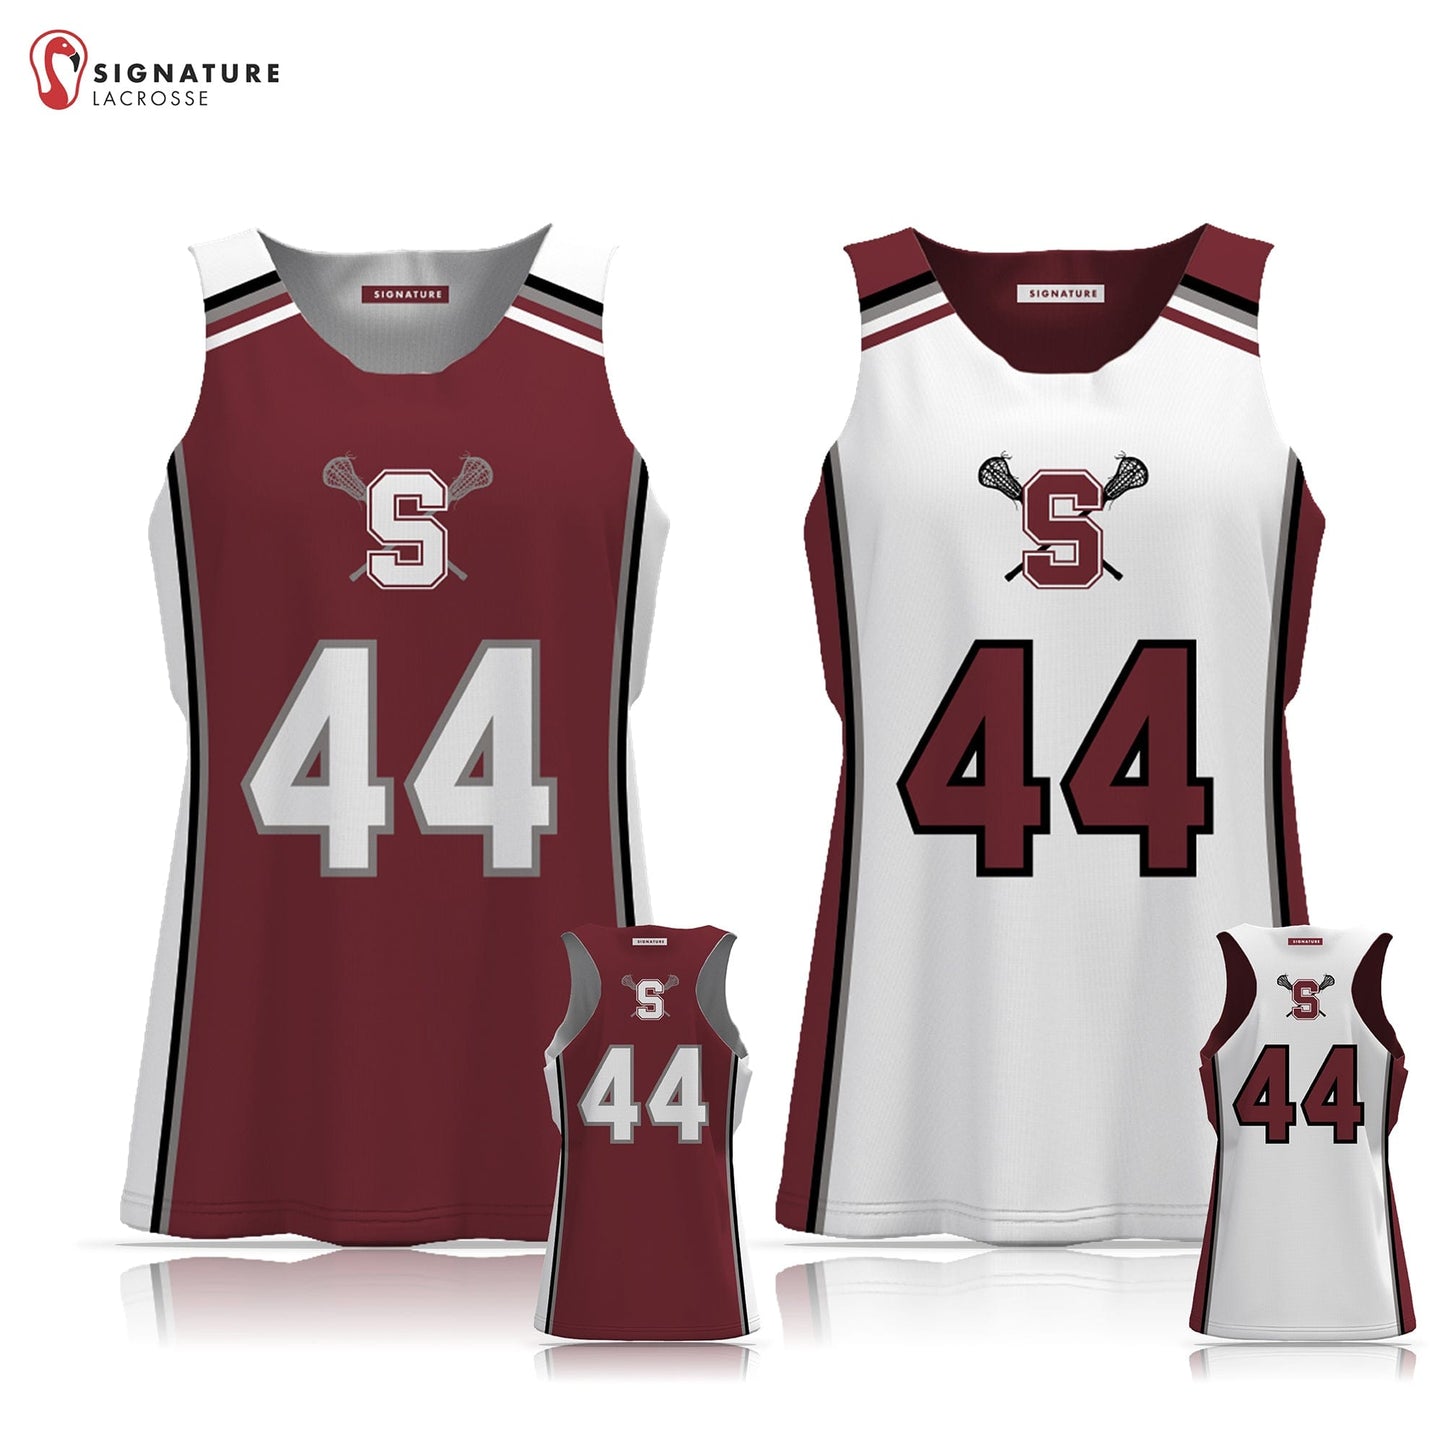 State College Women's Player Reversible Game Pinnie: 5-6 Signature Lacrosse